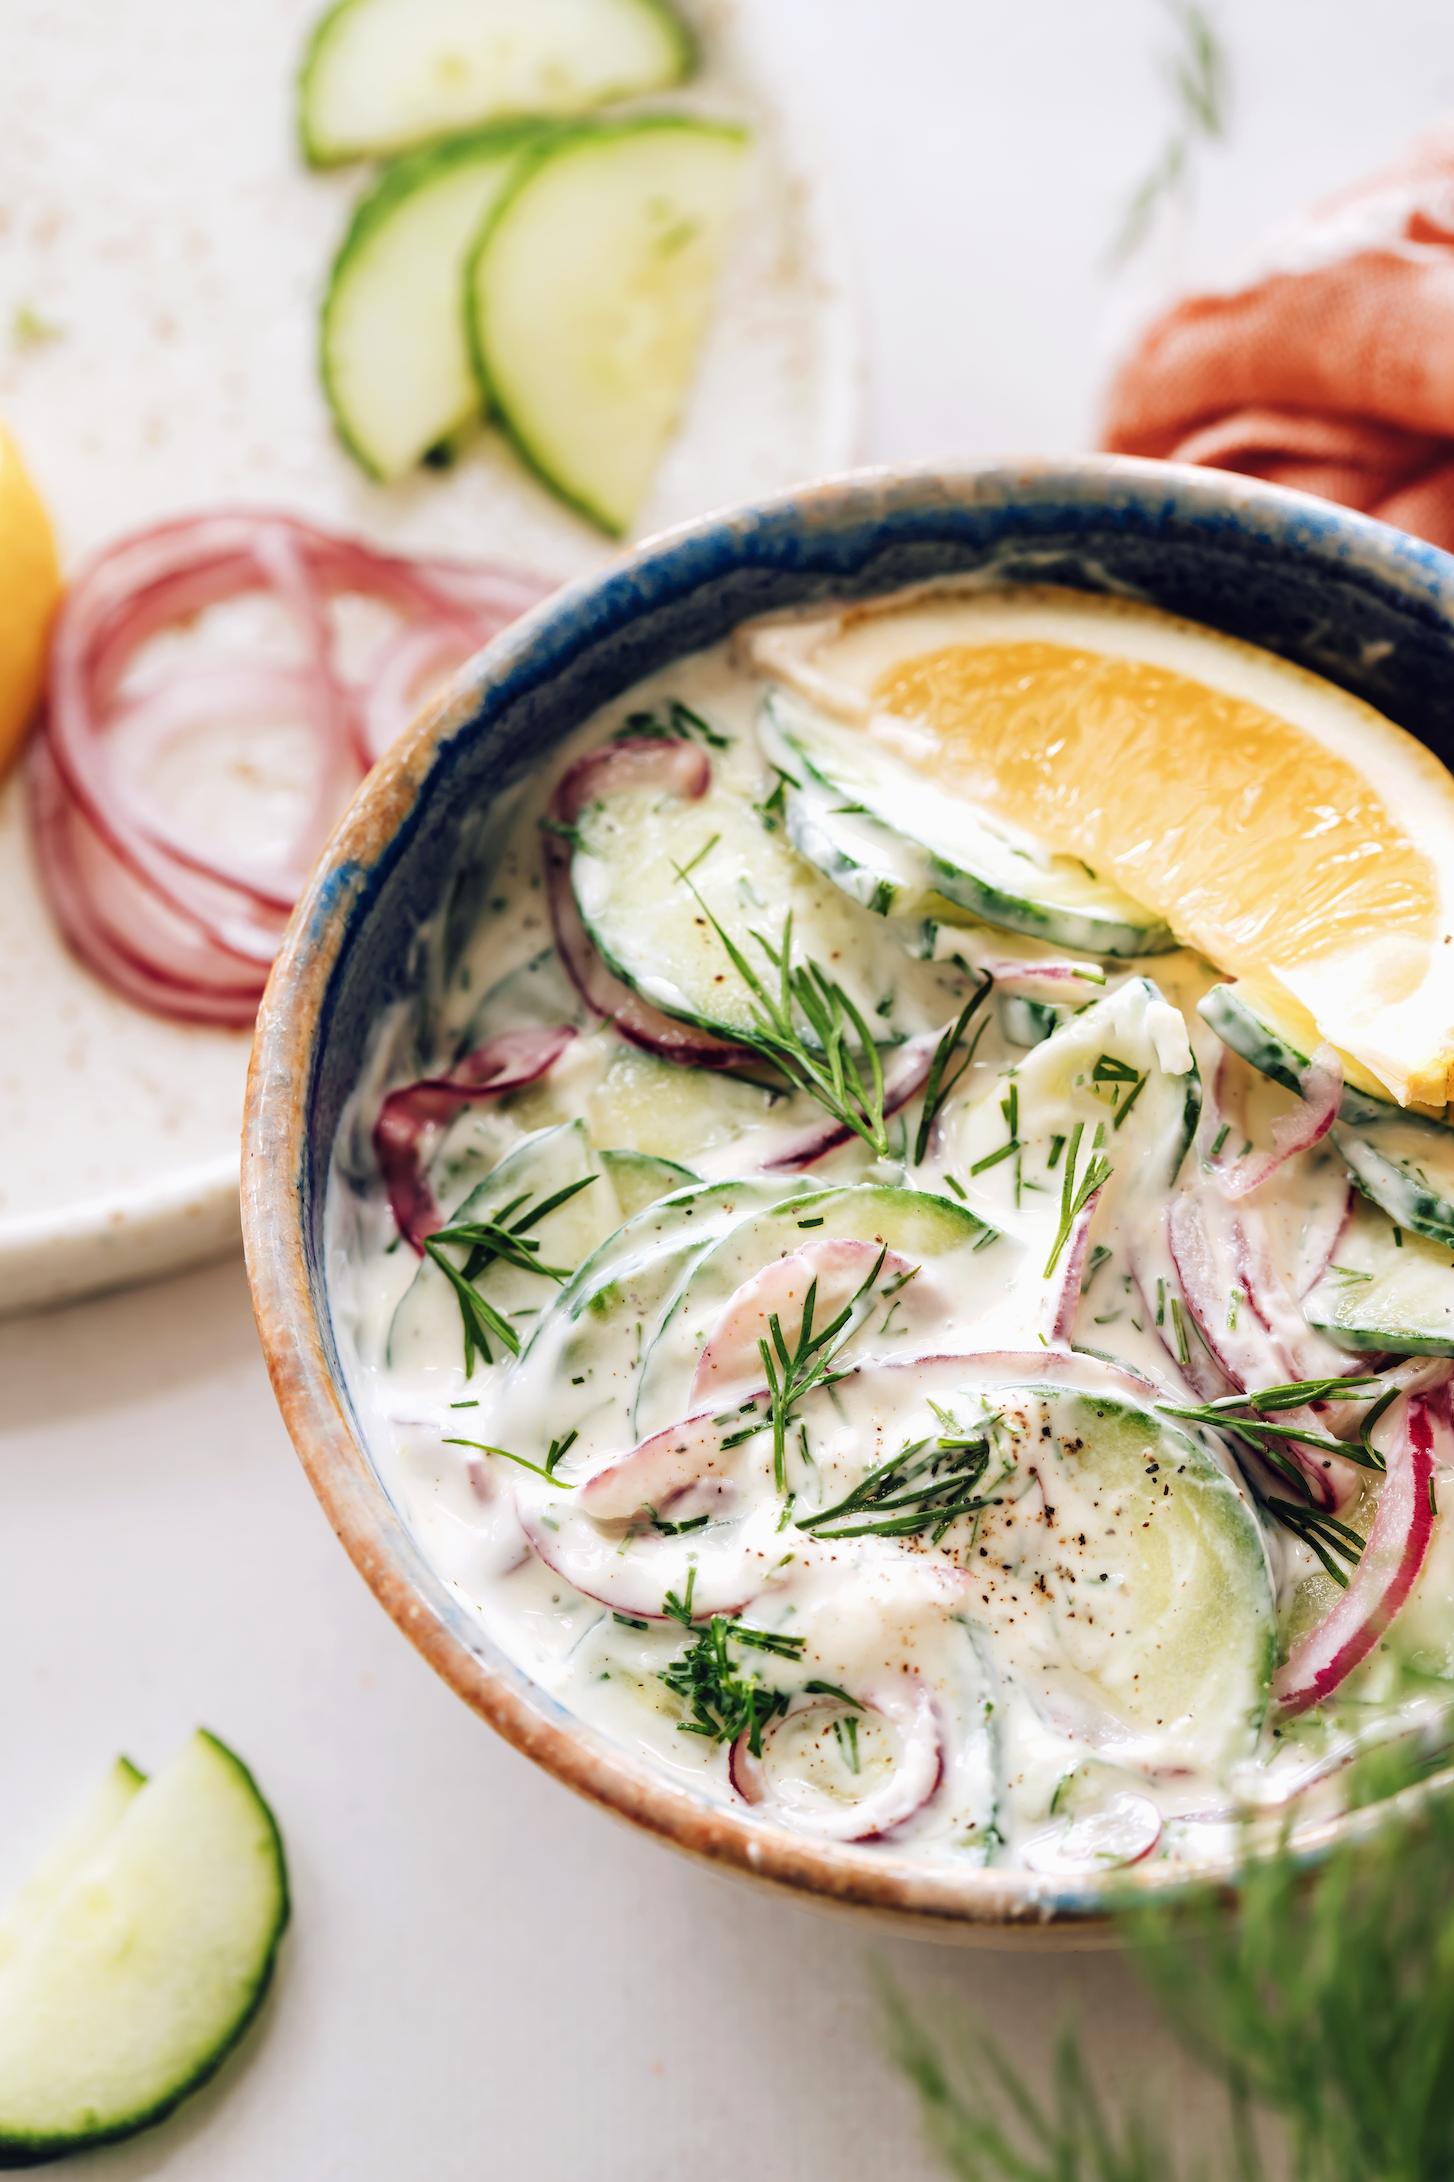  Cool and creamy, this vegan cucumber salad is perfect for hot summer days.